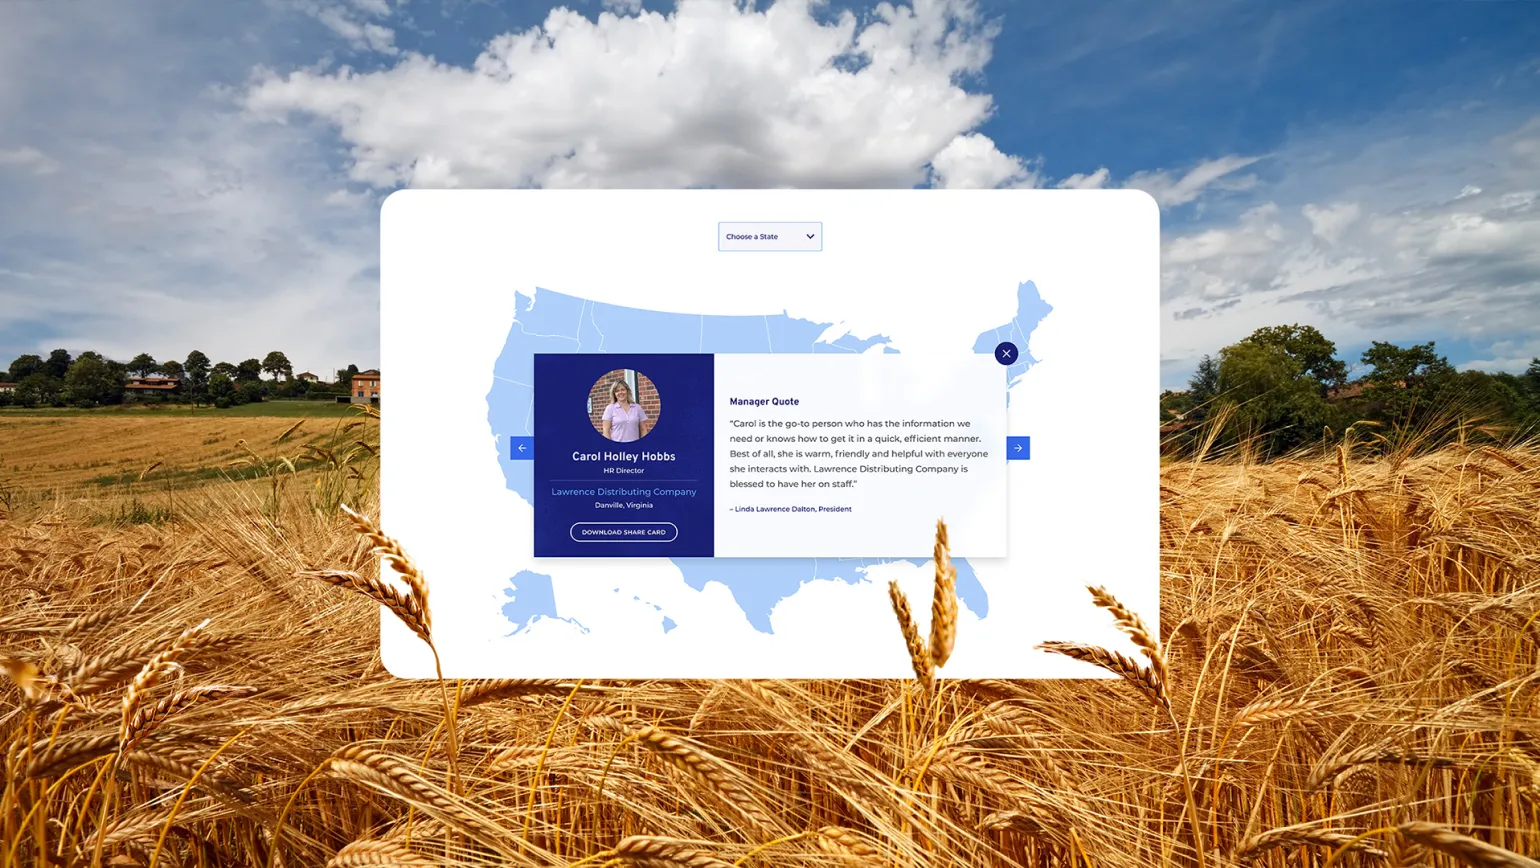 A website interface is overlaid on a wheat field background under a partly cloudy sky. The interface shows a map of the United States, a photo of a woman, and a description box with her name and role, along with a button to "Choose State.